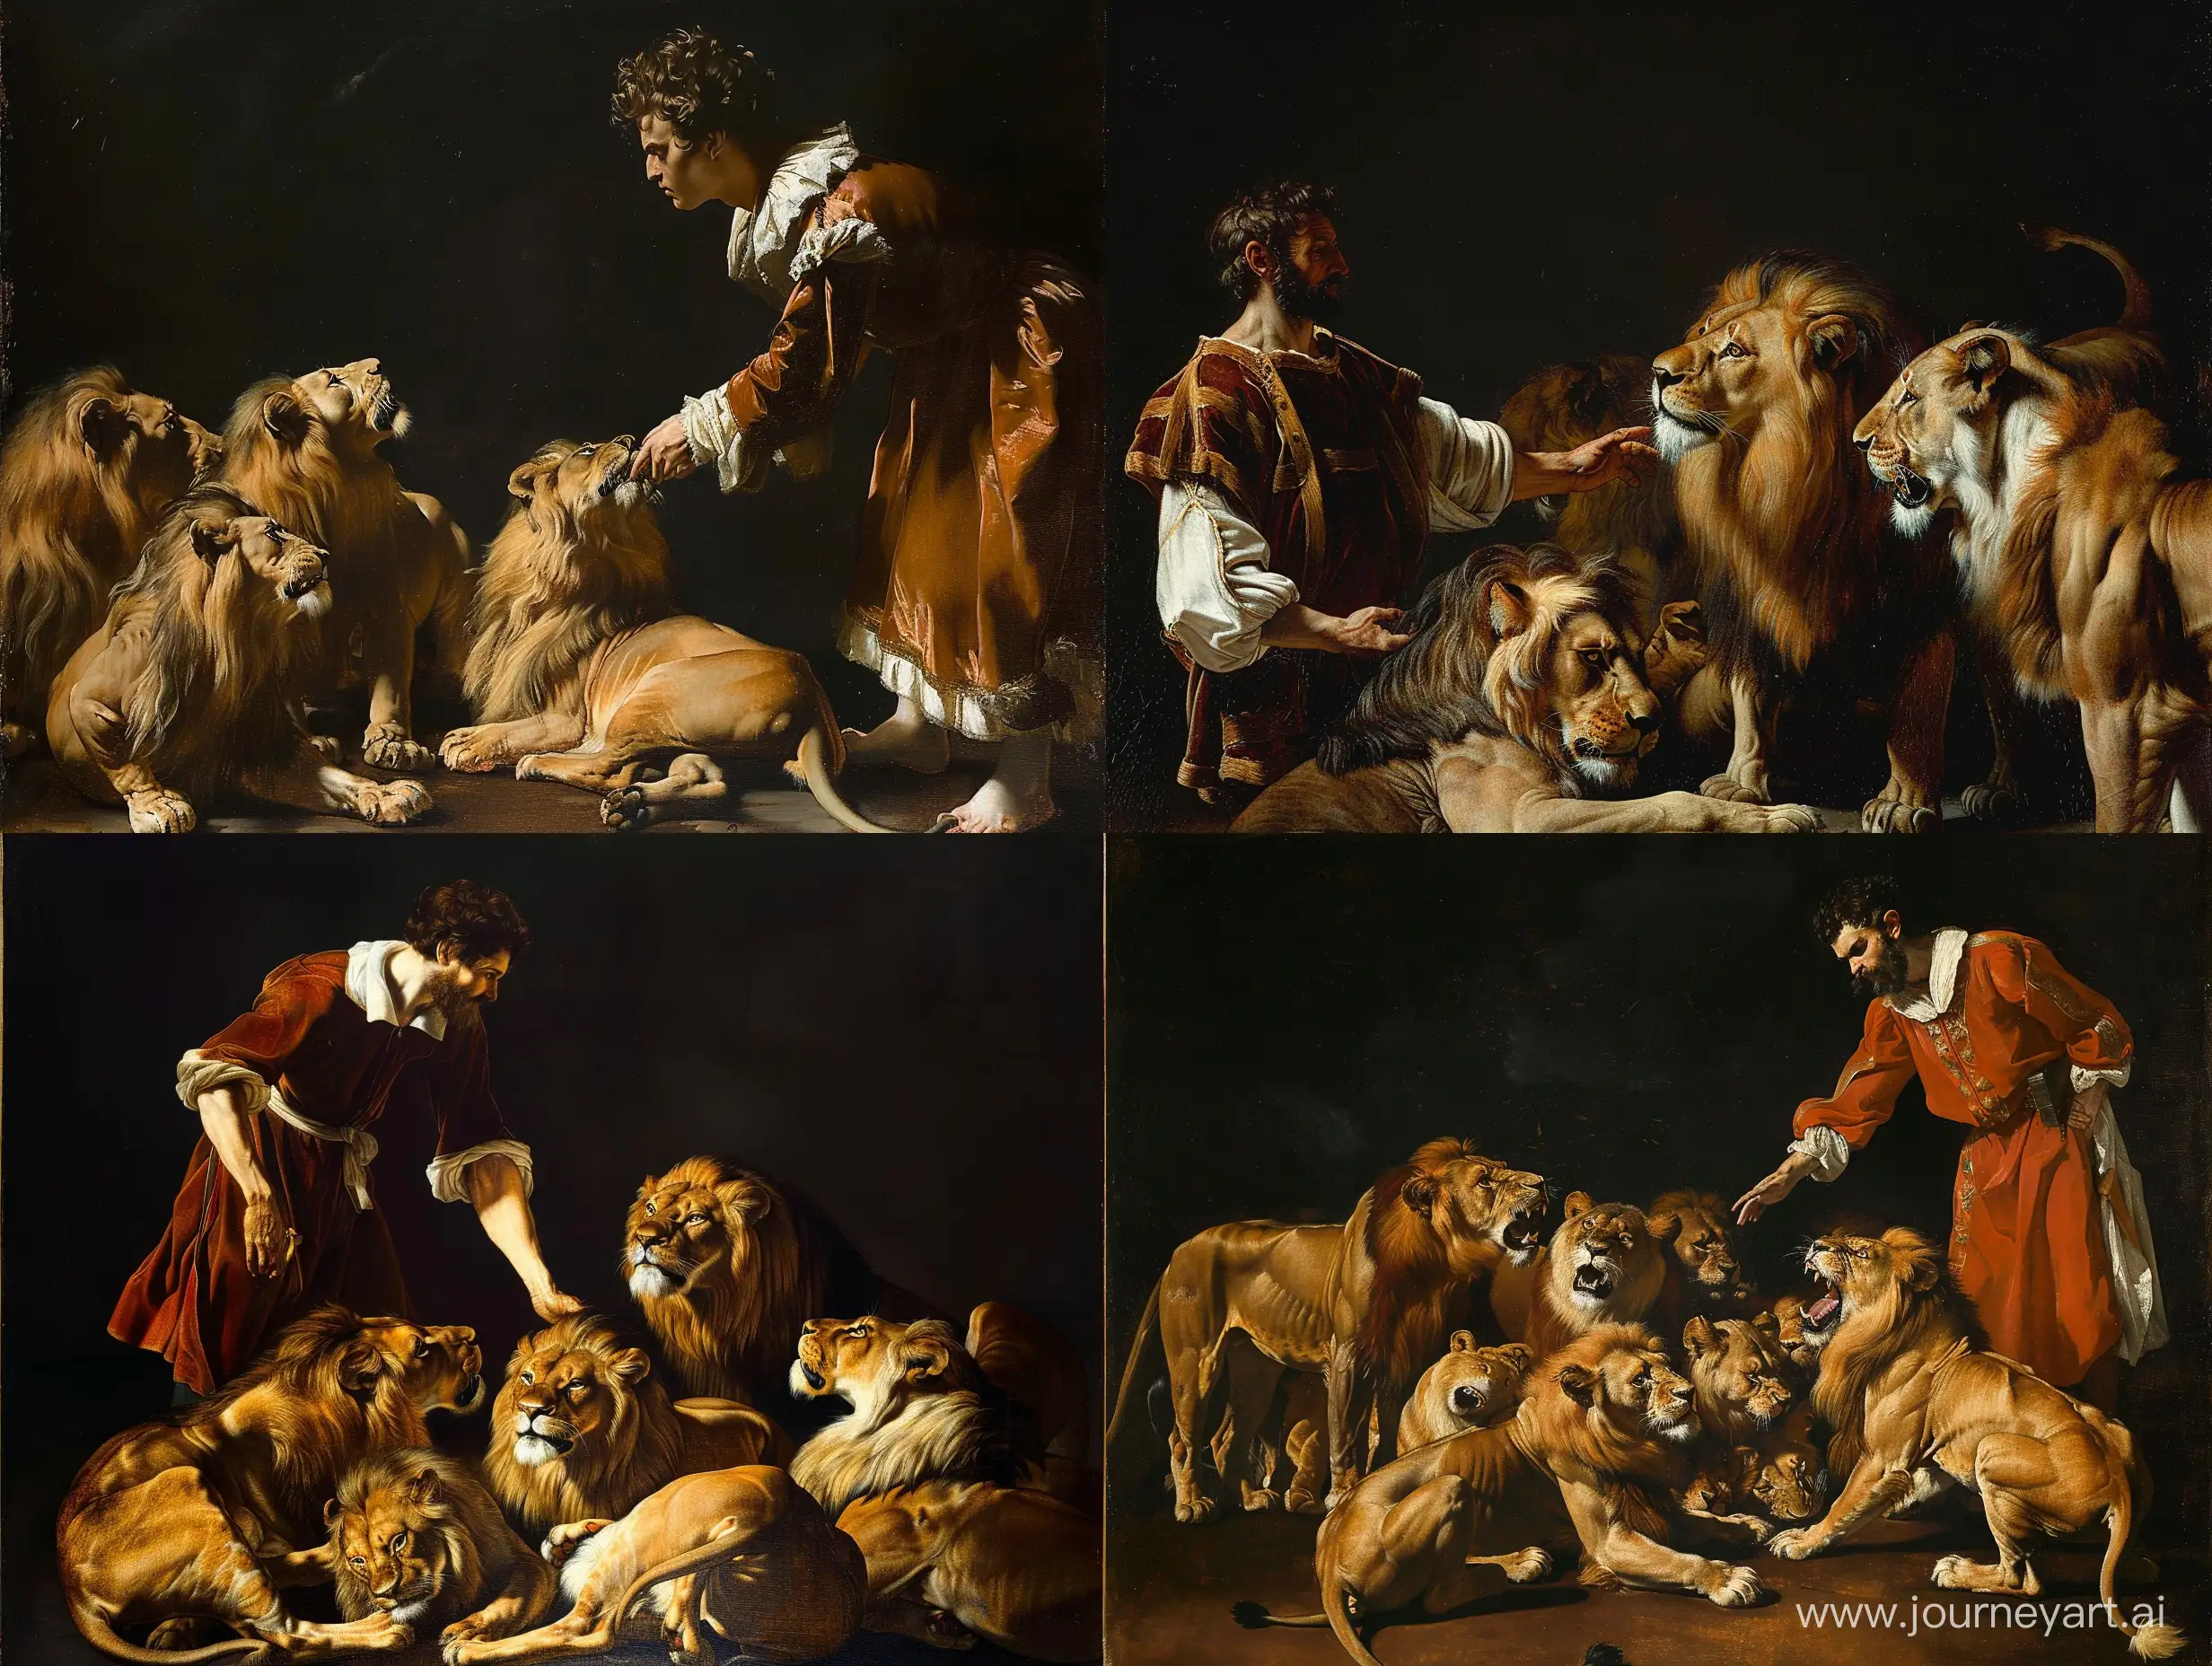 Baroque-Art-Painting-Man-Taming-Lions-in-Dramatic-Black-Background